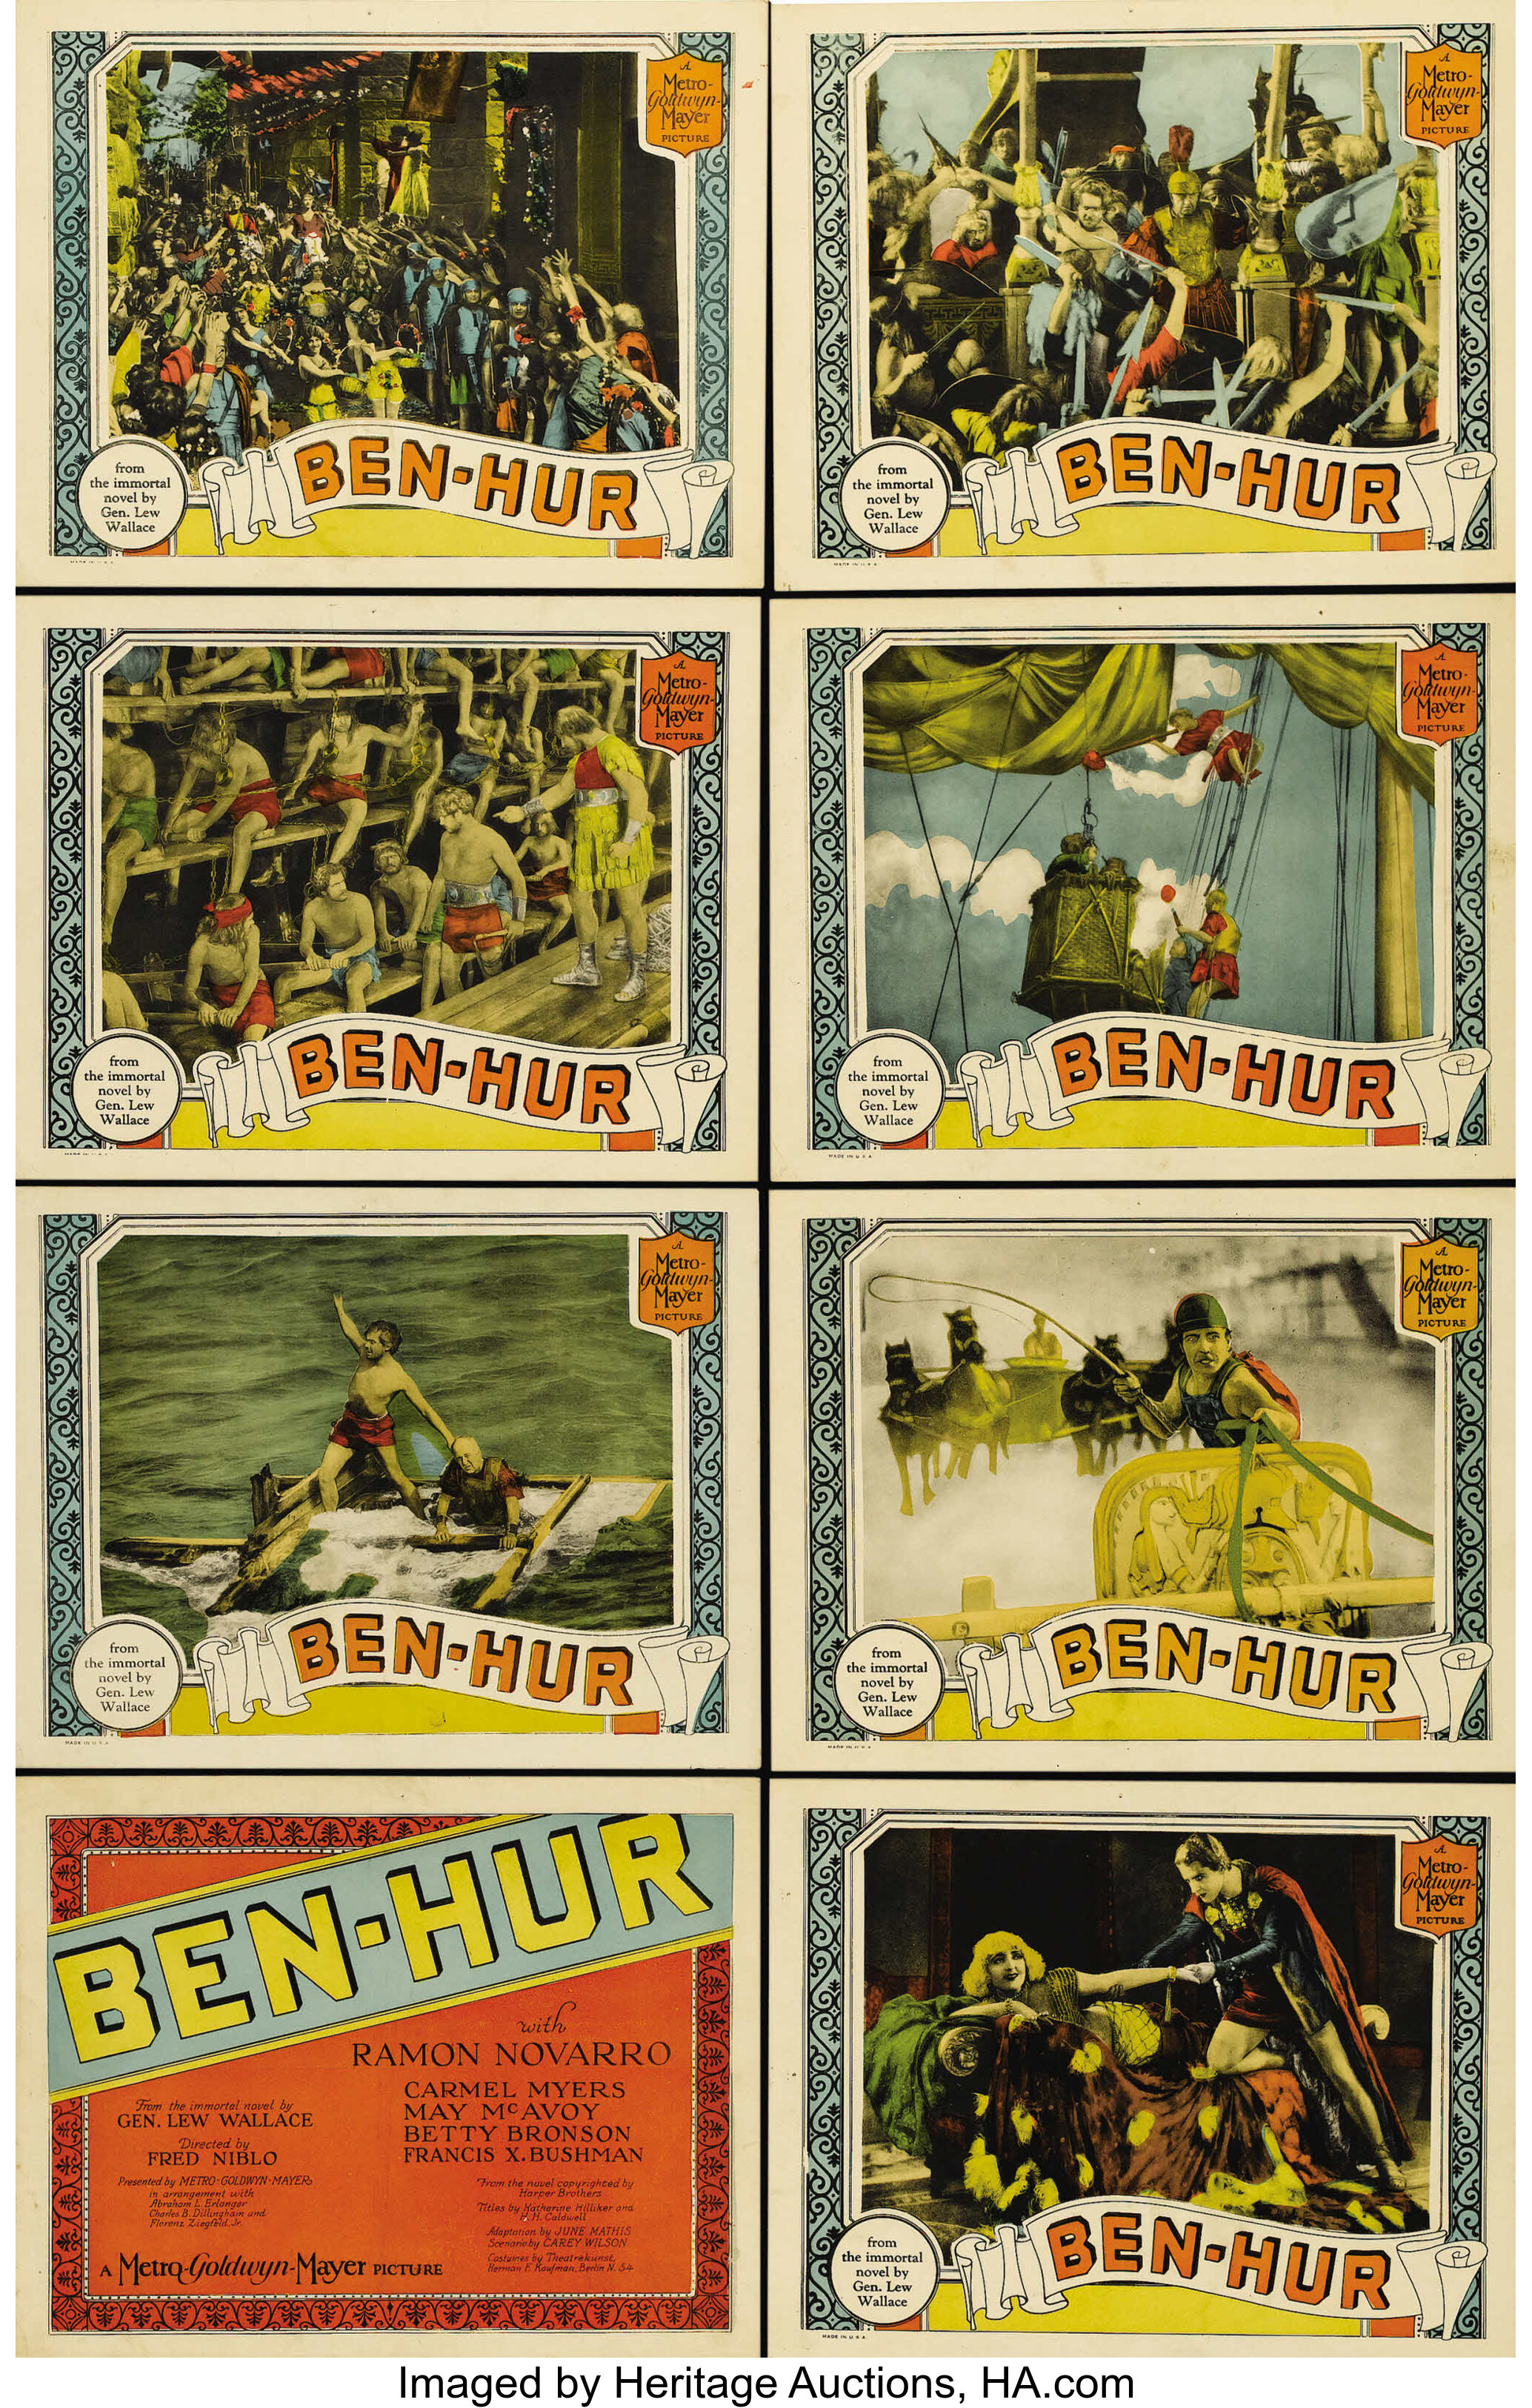 Ben Hur Mgm 1925 Lobby Card Set Of 8 11 X 14 One Of The Lot 28338 Heritage Auctions 2959